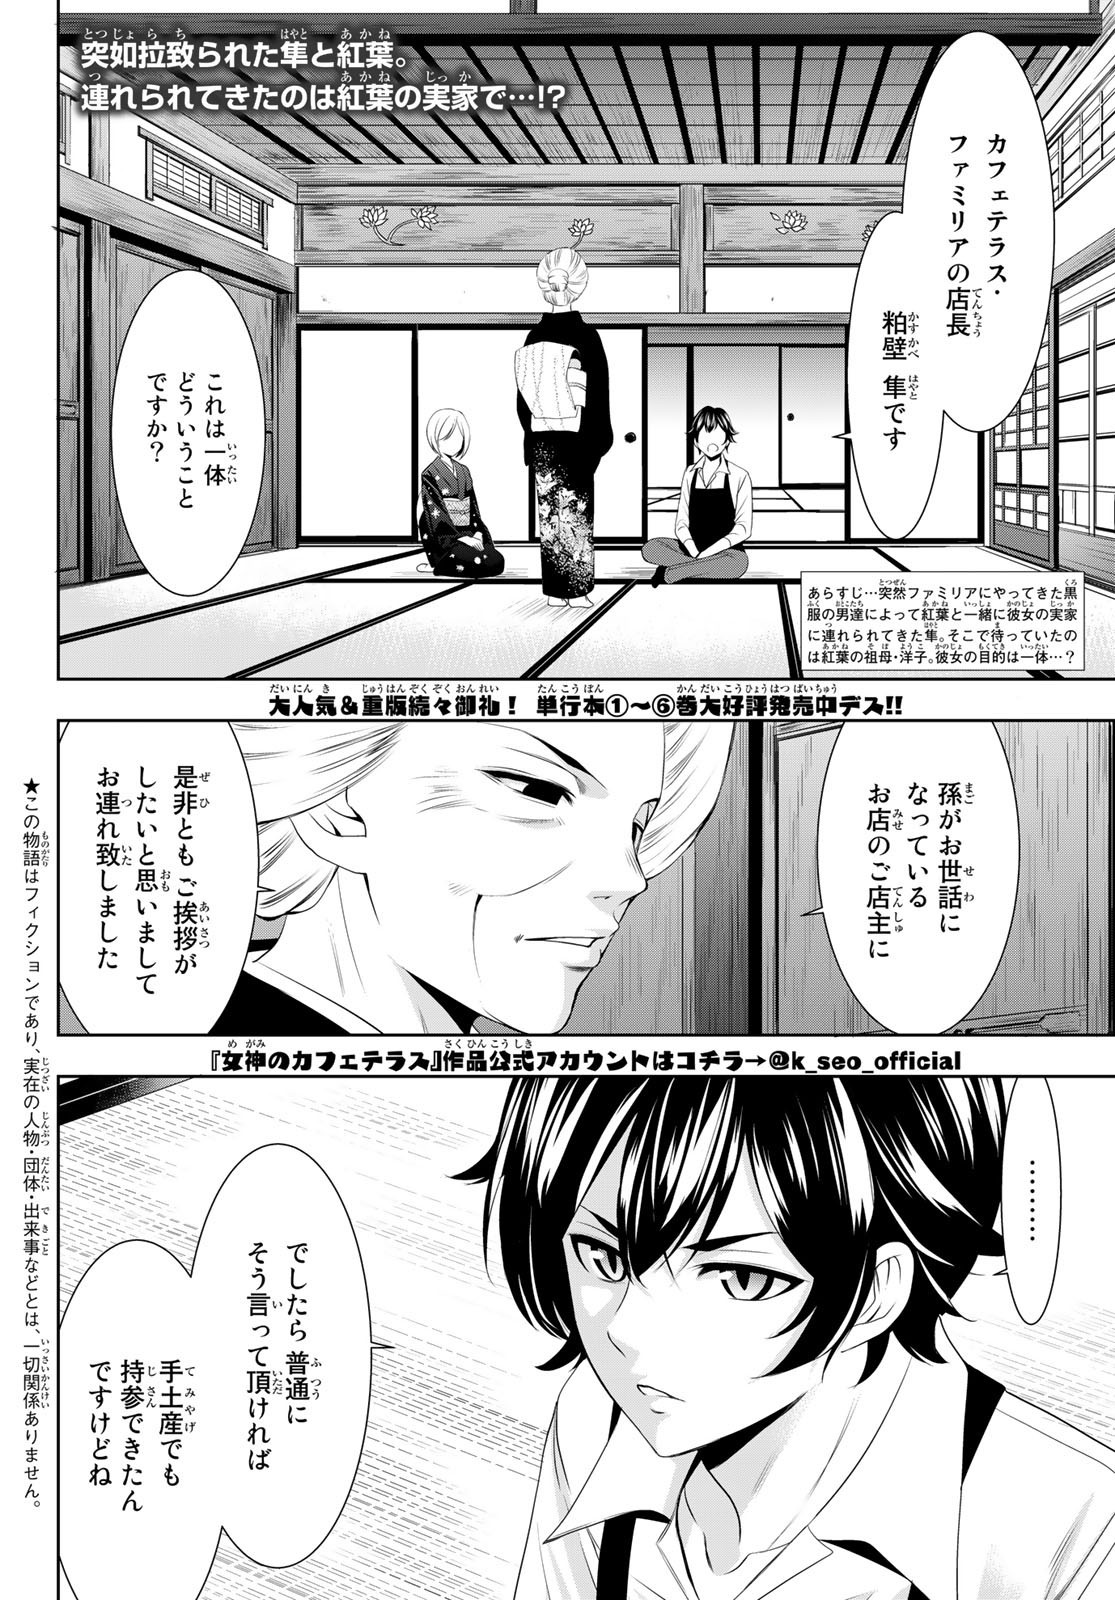 Goddess-Cafe-Terrace - Chapter 069 - Page 2